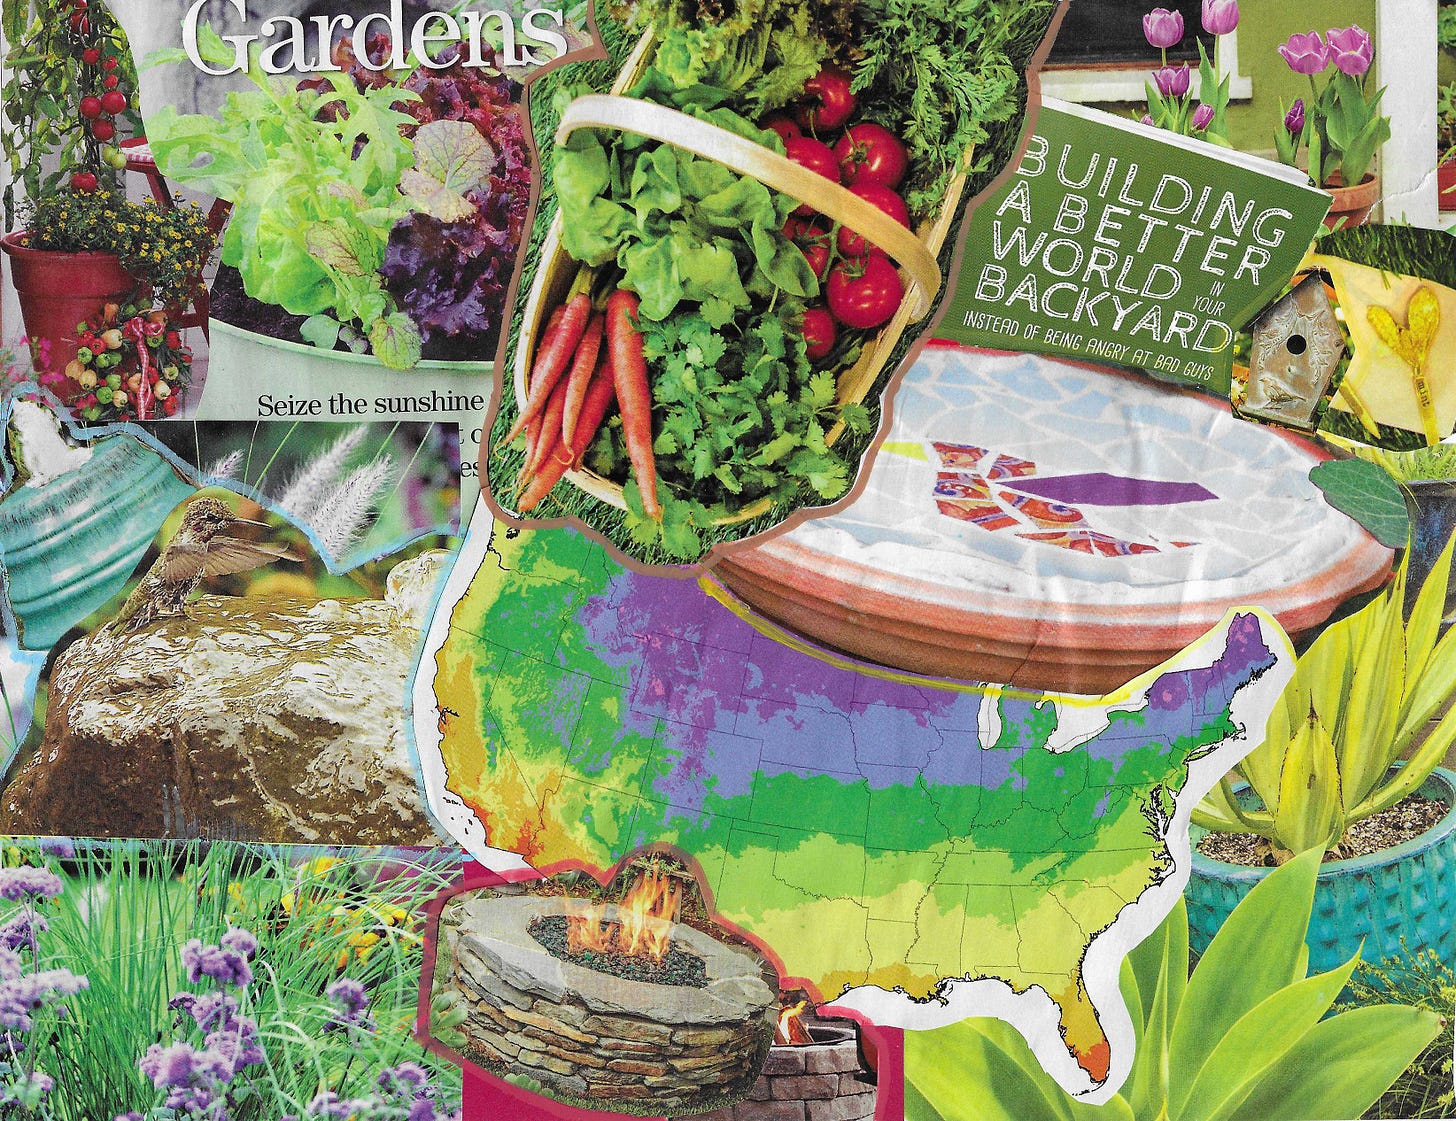 Vision board depicting gardening imagery